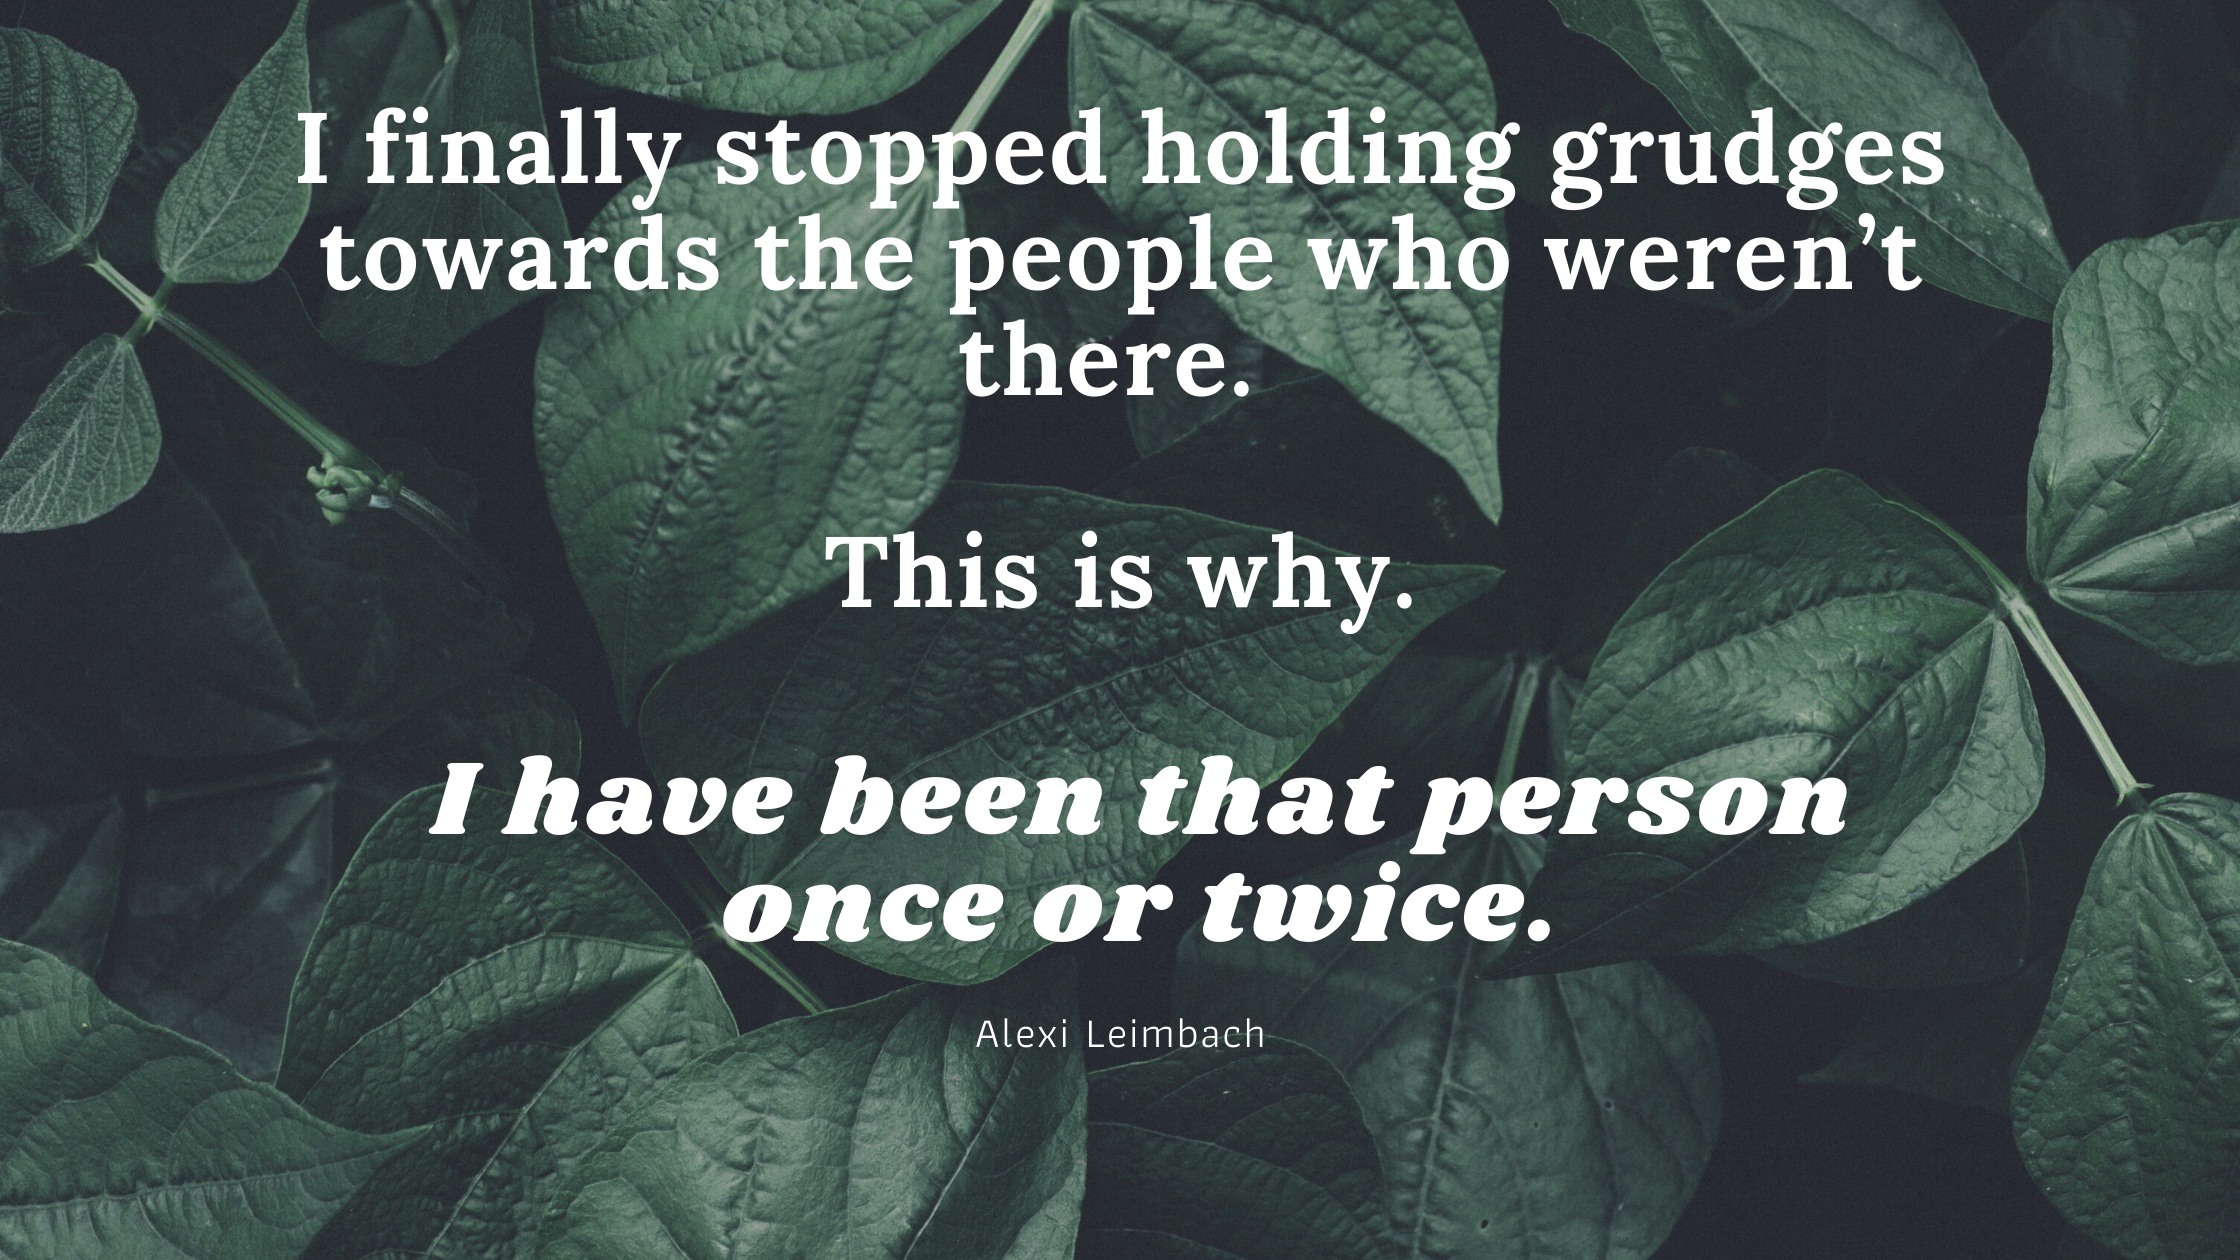 I finally stopped holding grudges towards the people who weren’t there. This is why. I have been that person once or twice.